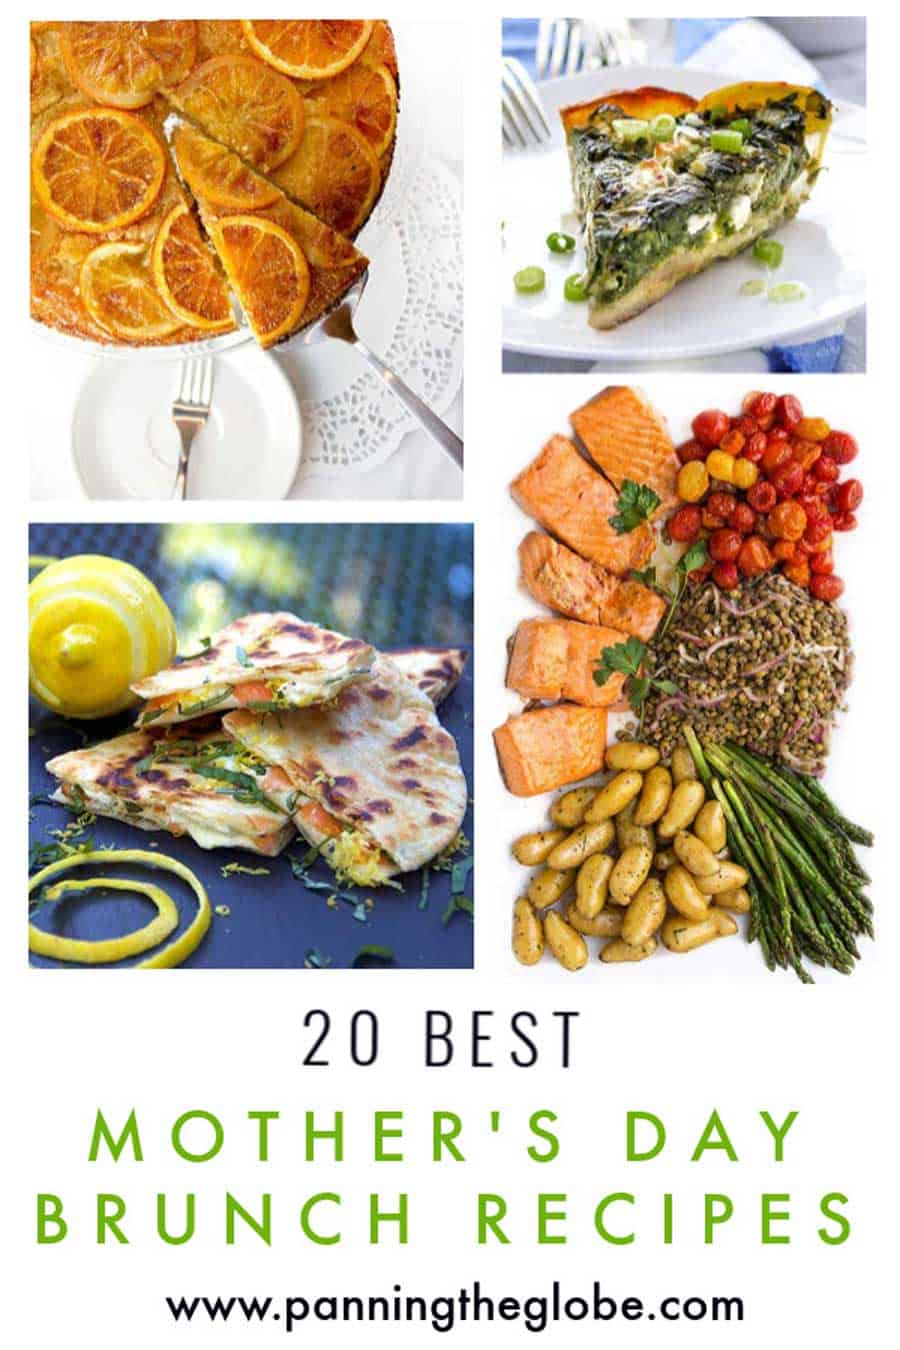 collage of 4 of Panning The Globe's best mother's day brunch recipes: orange vanilla upside down cake, Greek spinach pie, Smoked Salmon quesadillas and salmon nicoise salad